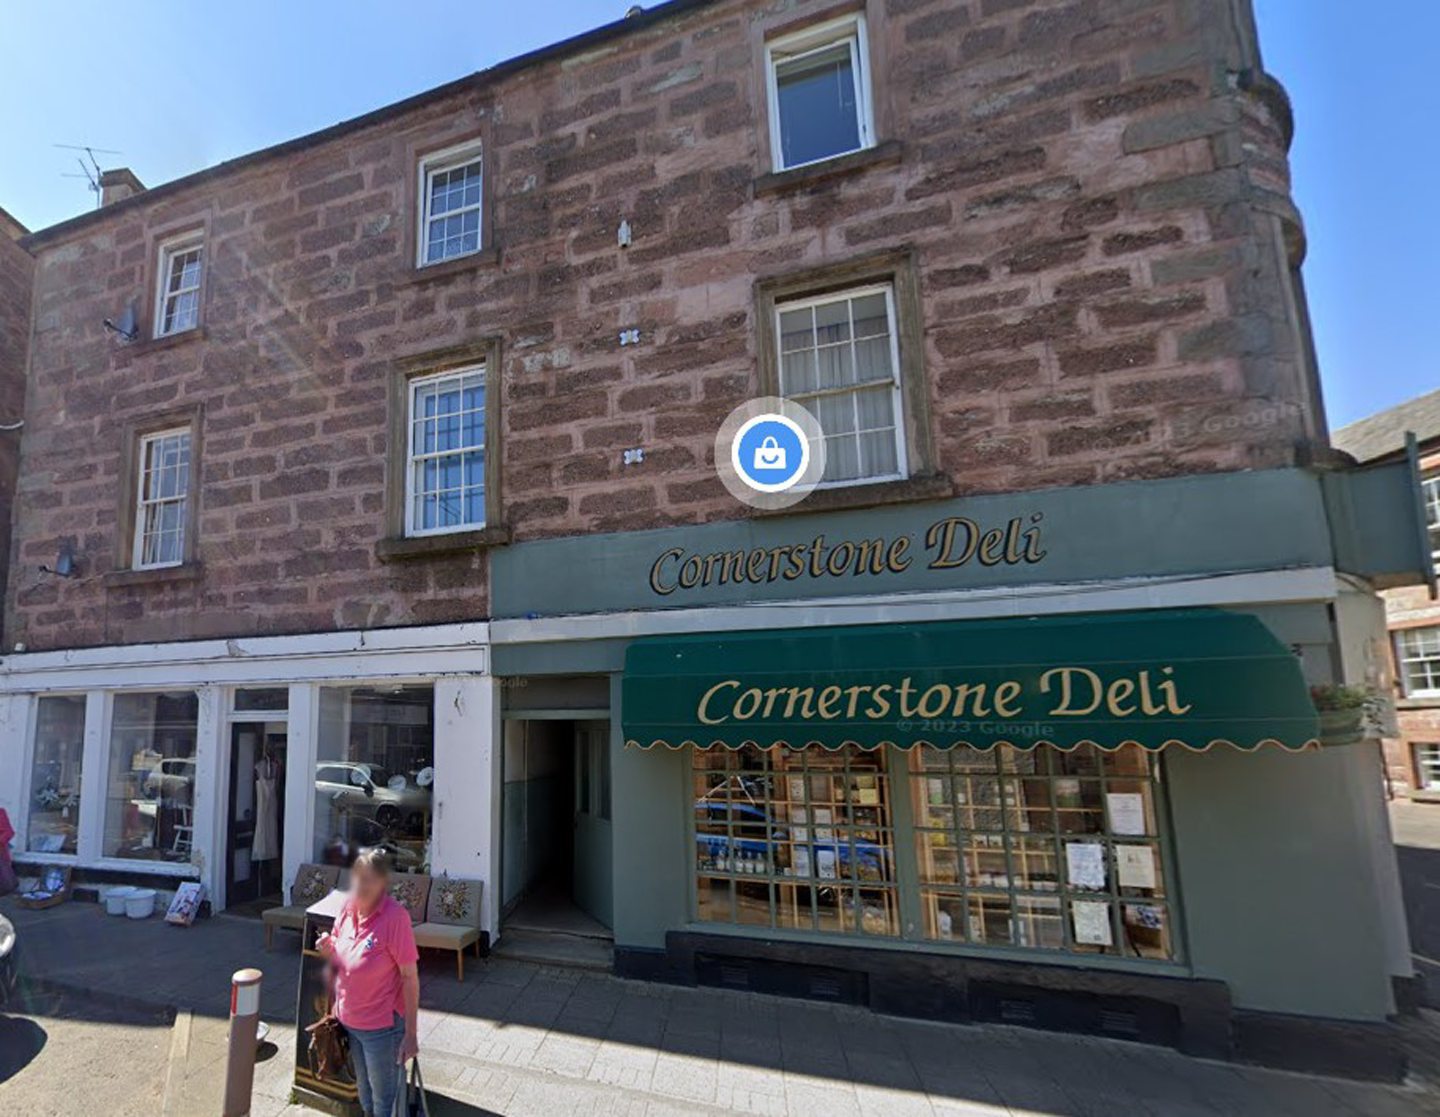 The holiday let is on the junction of High Street and Brown Street, Blairgowrie.